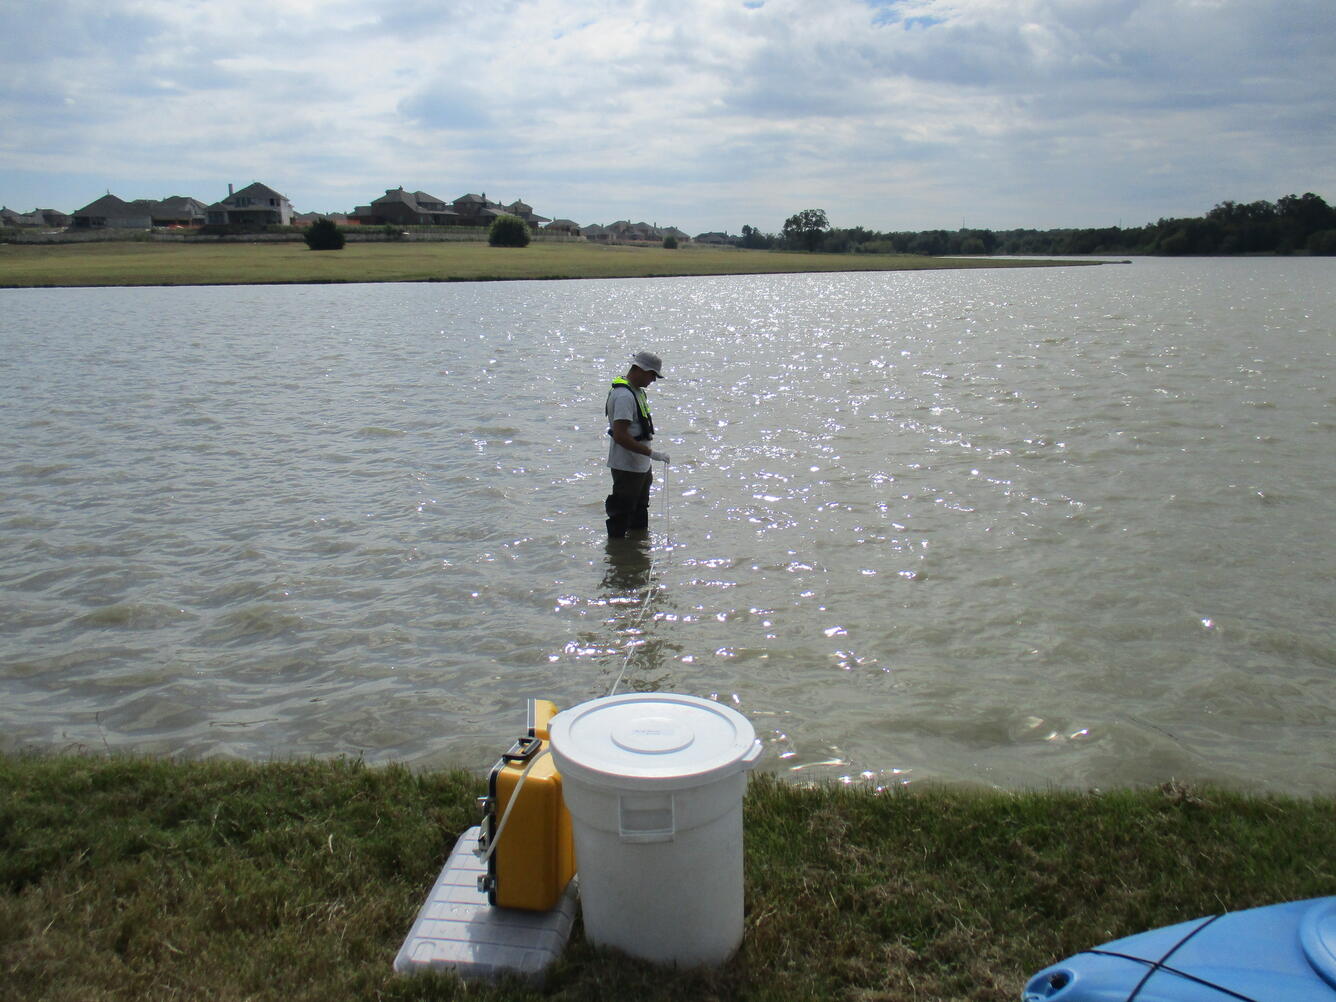 Collecting water samples to test for cyanotoxins, Texas